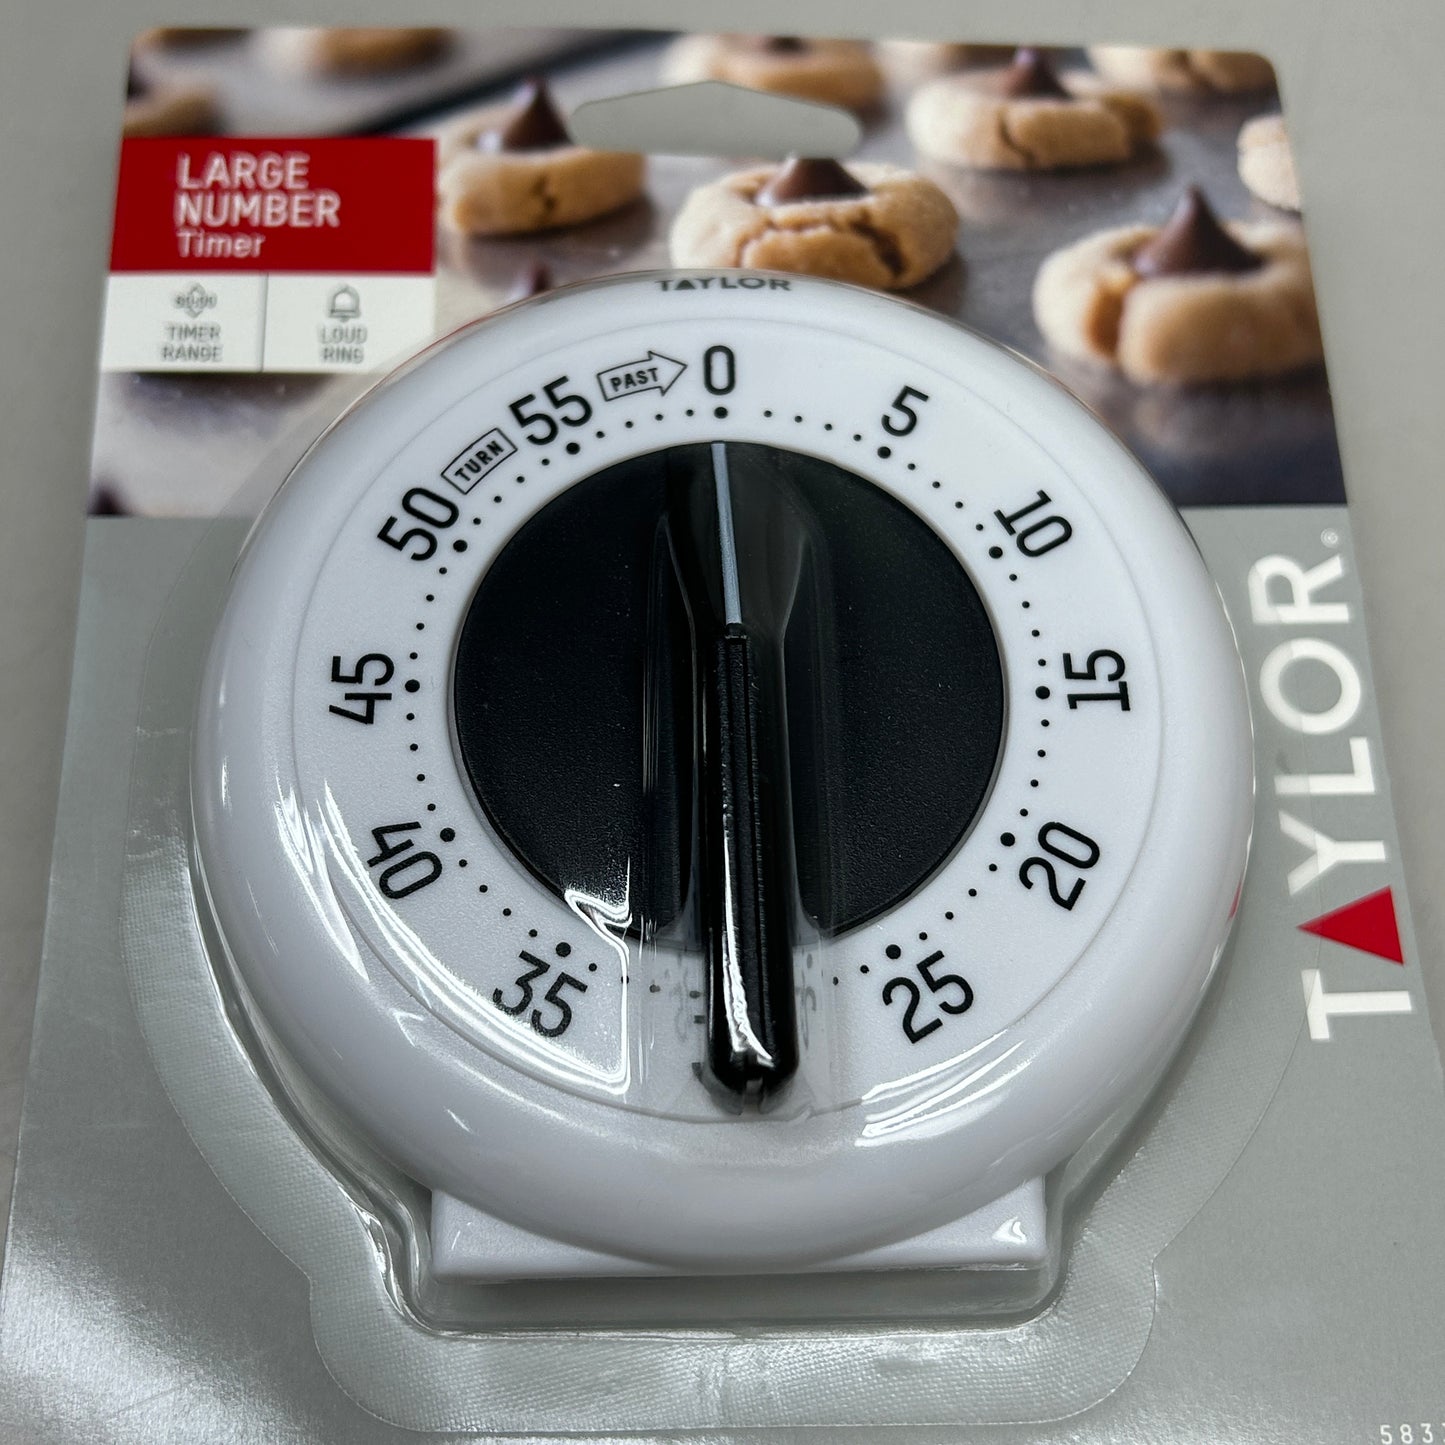 TAYLOR Large Number Timer White 5831N (New)